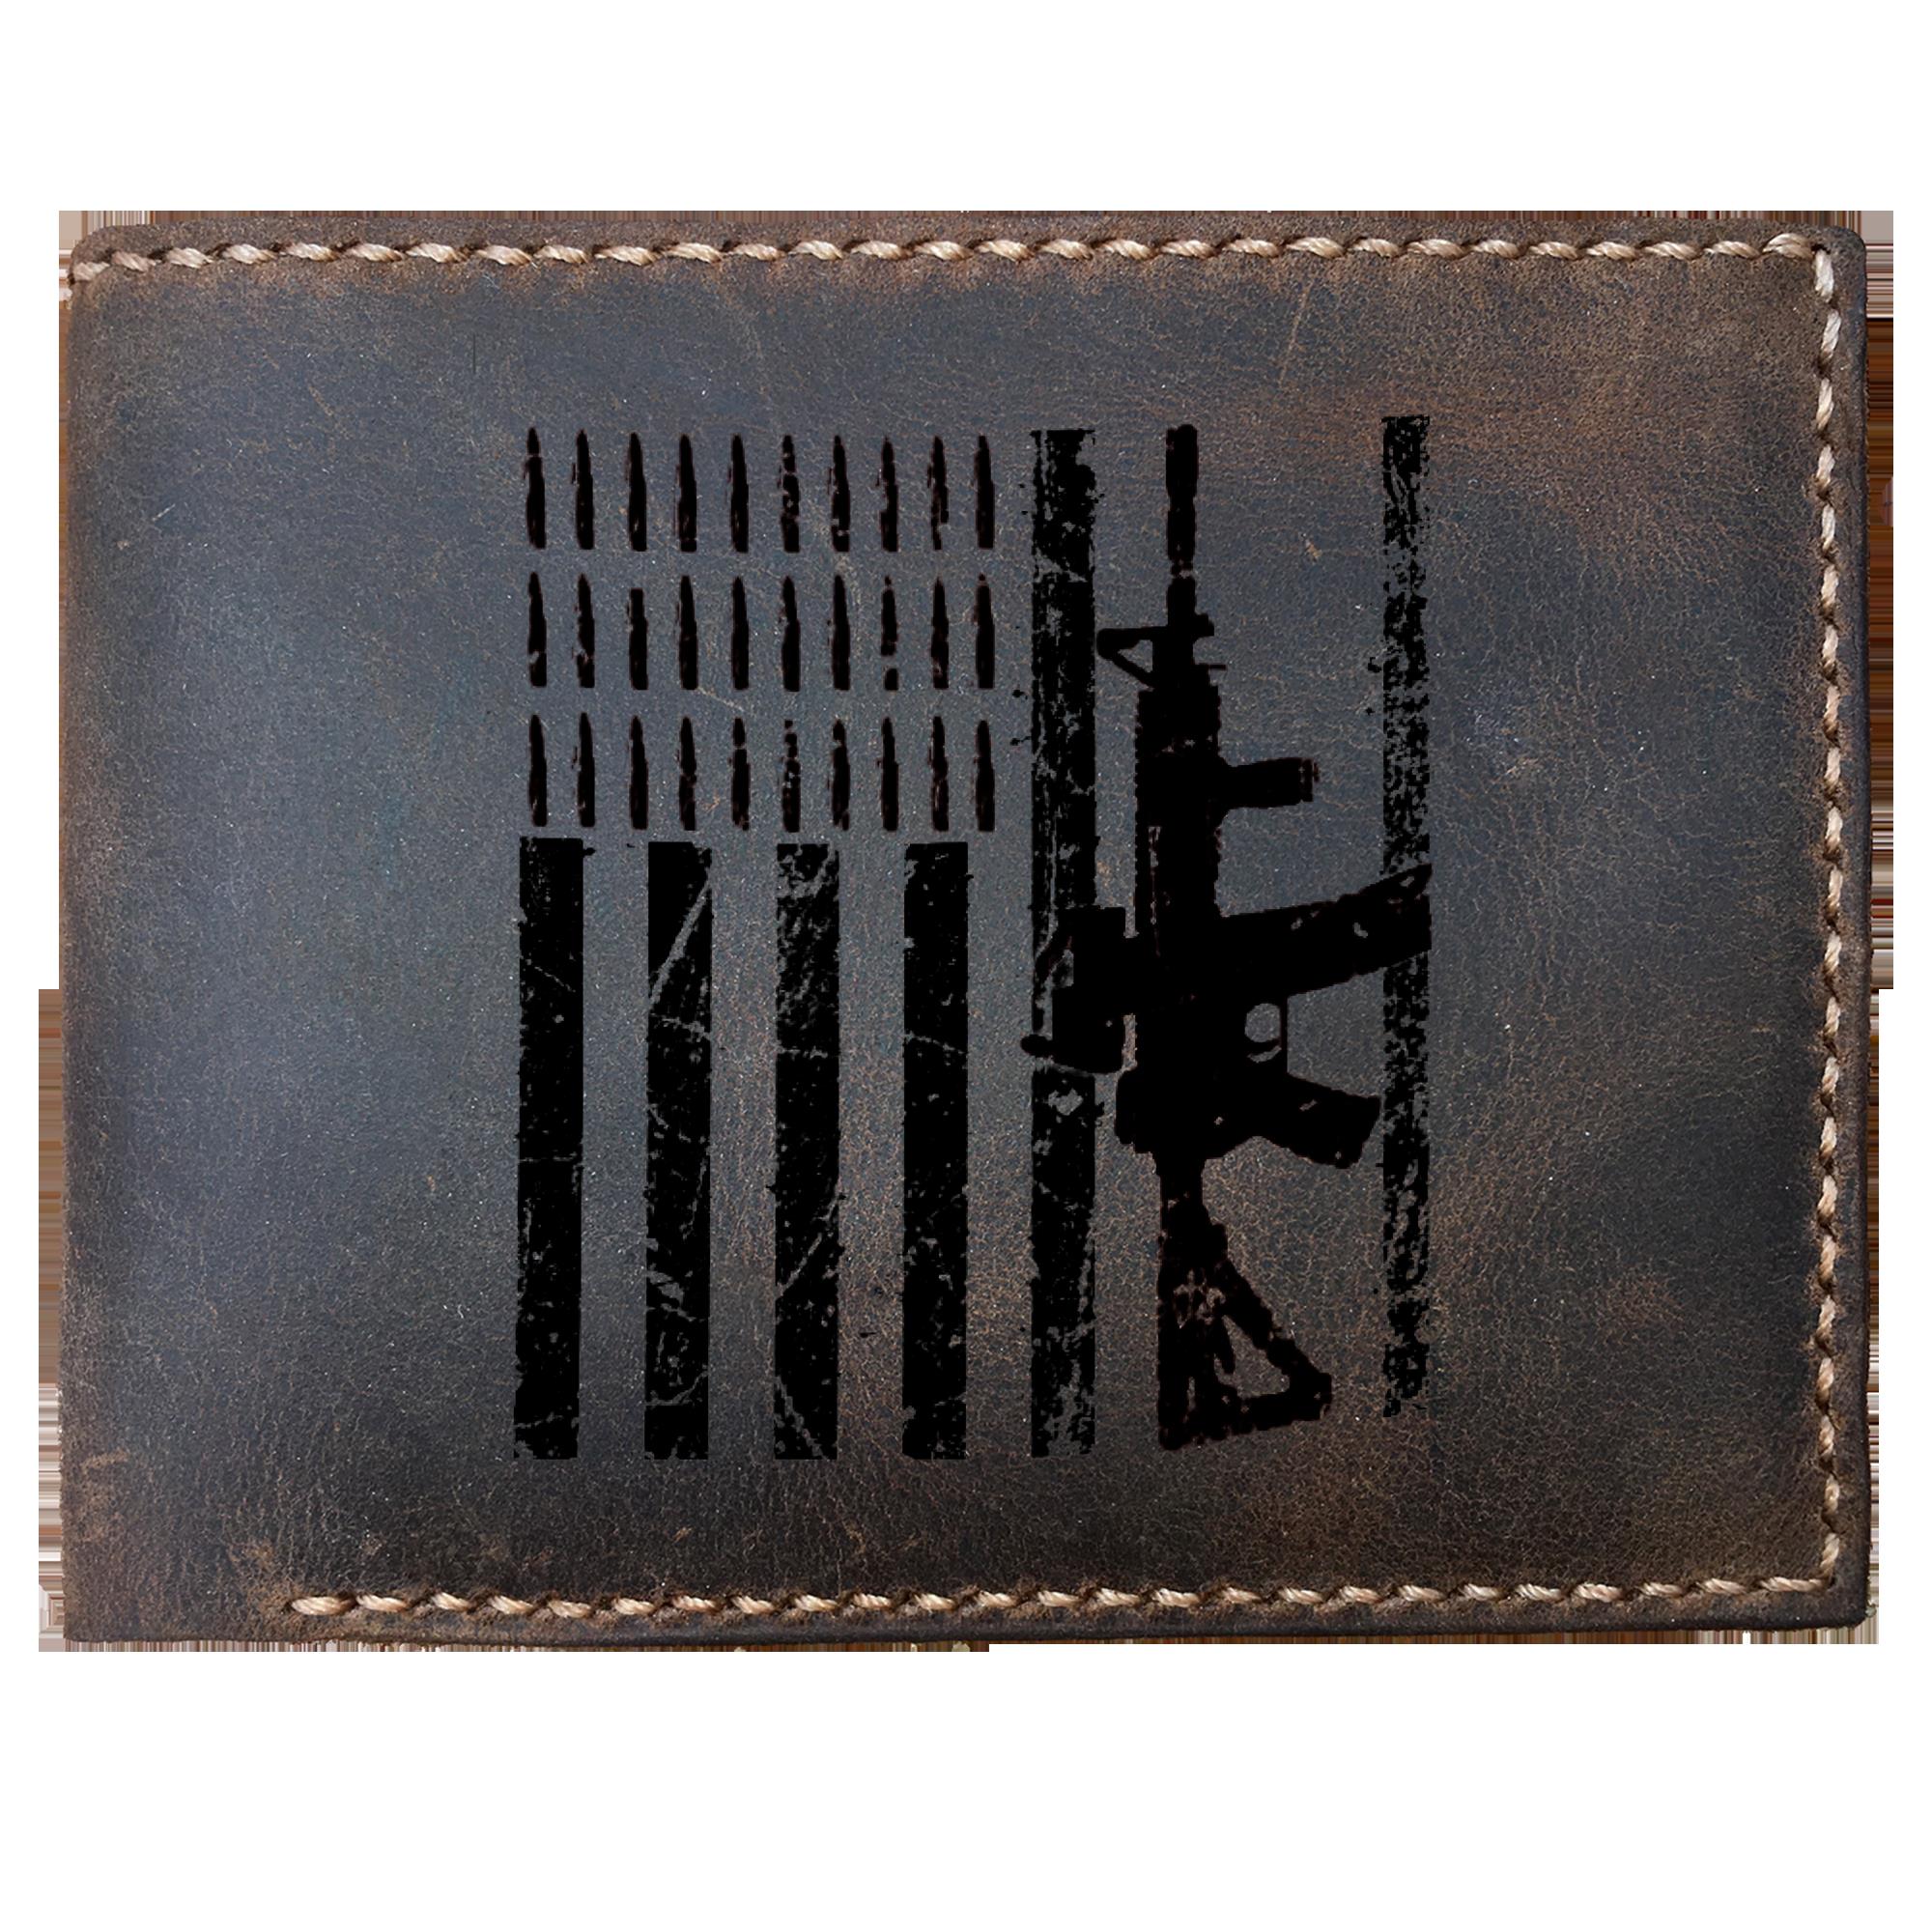 Skitongifts Funny Custom Laser Engraved Bifold Leather Wallet For Men, Ar-15 American Flag Gun Support 2nd Amendment